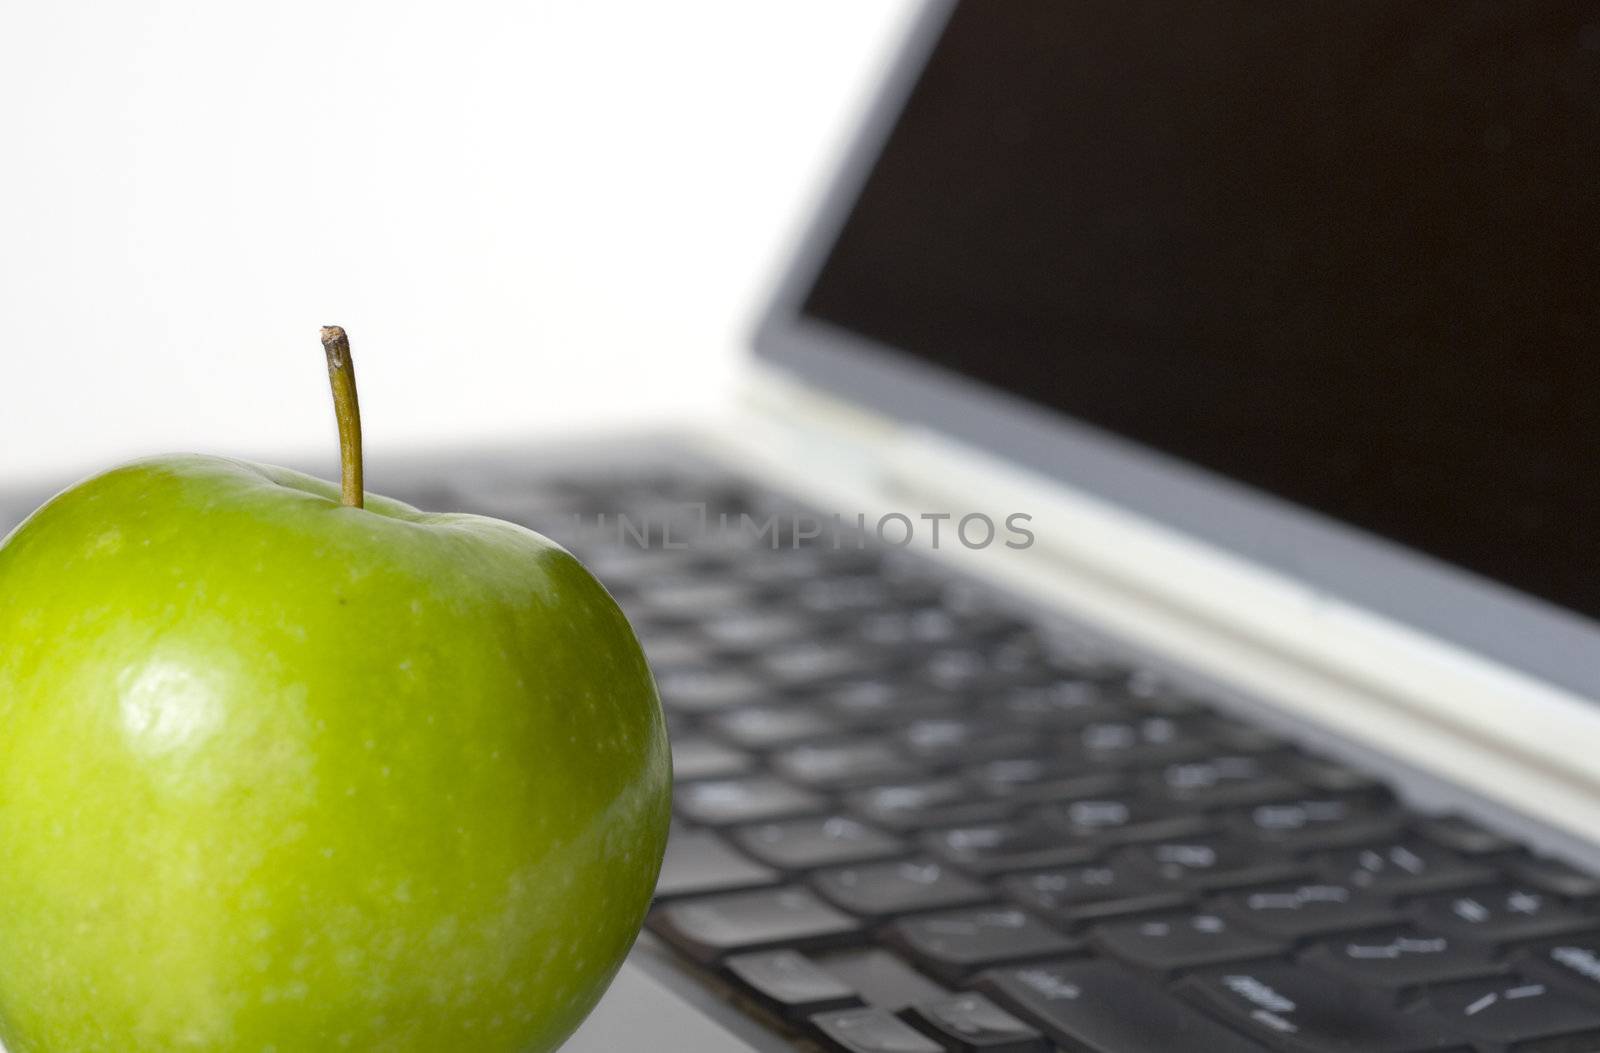 Macro shot with selective focus on green apple in the foreground with laptop in the background.